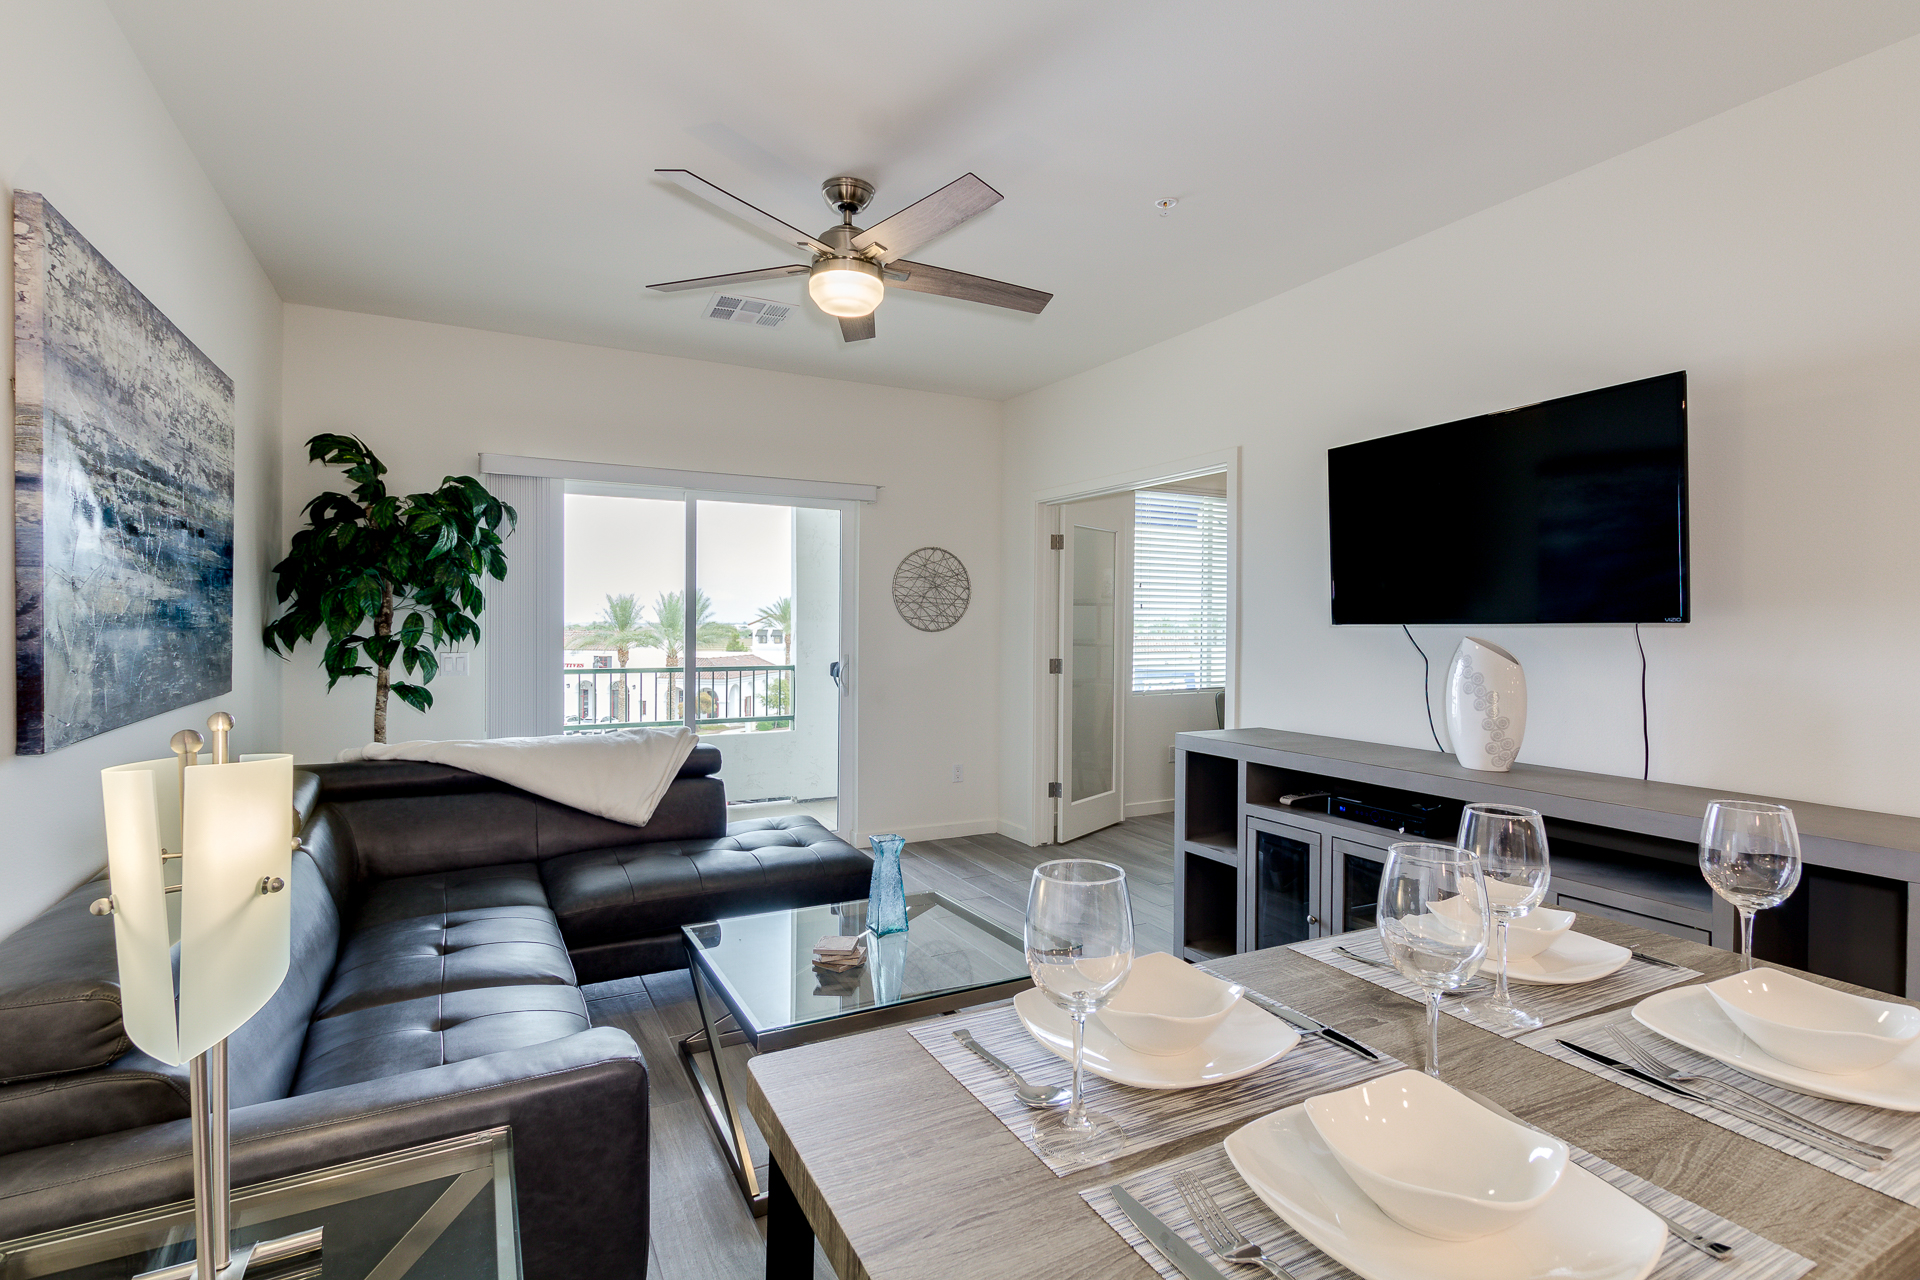 Resort Condo in Desirable Chandler. Tons of Amenities. Walk to Everything! 30 Night Min!